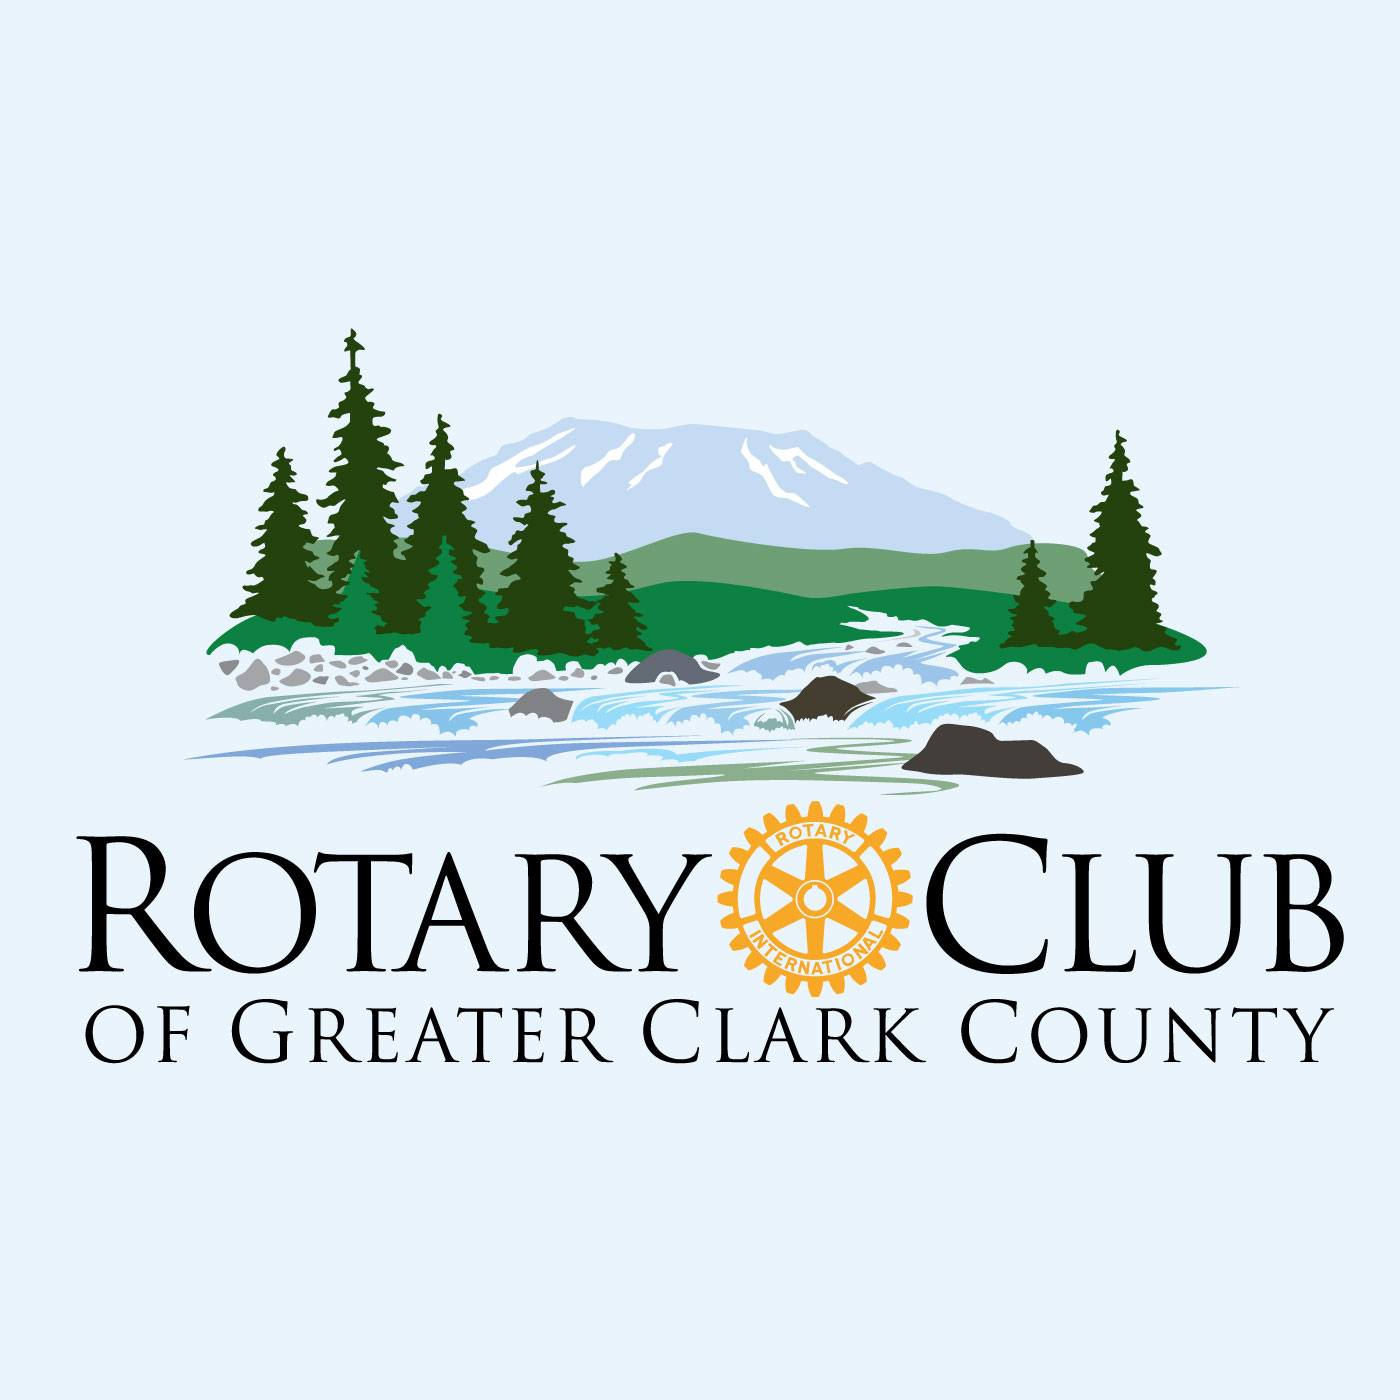 Rotary Club of Greater Clark County Website Redesign